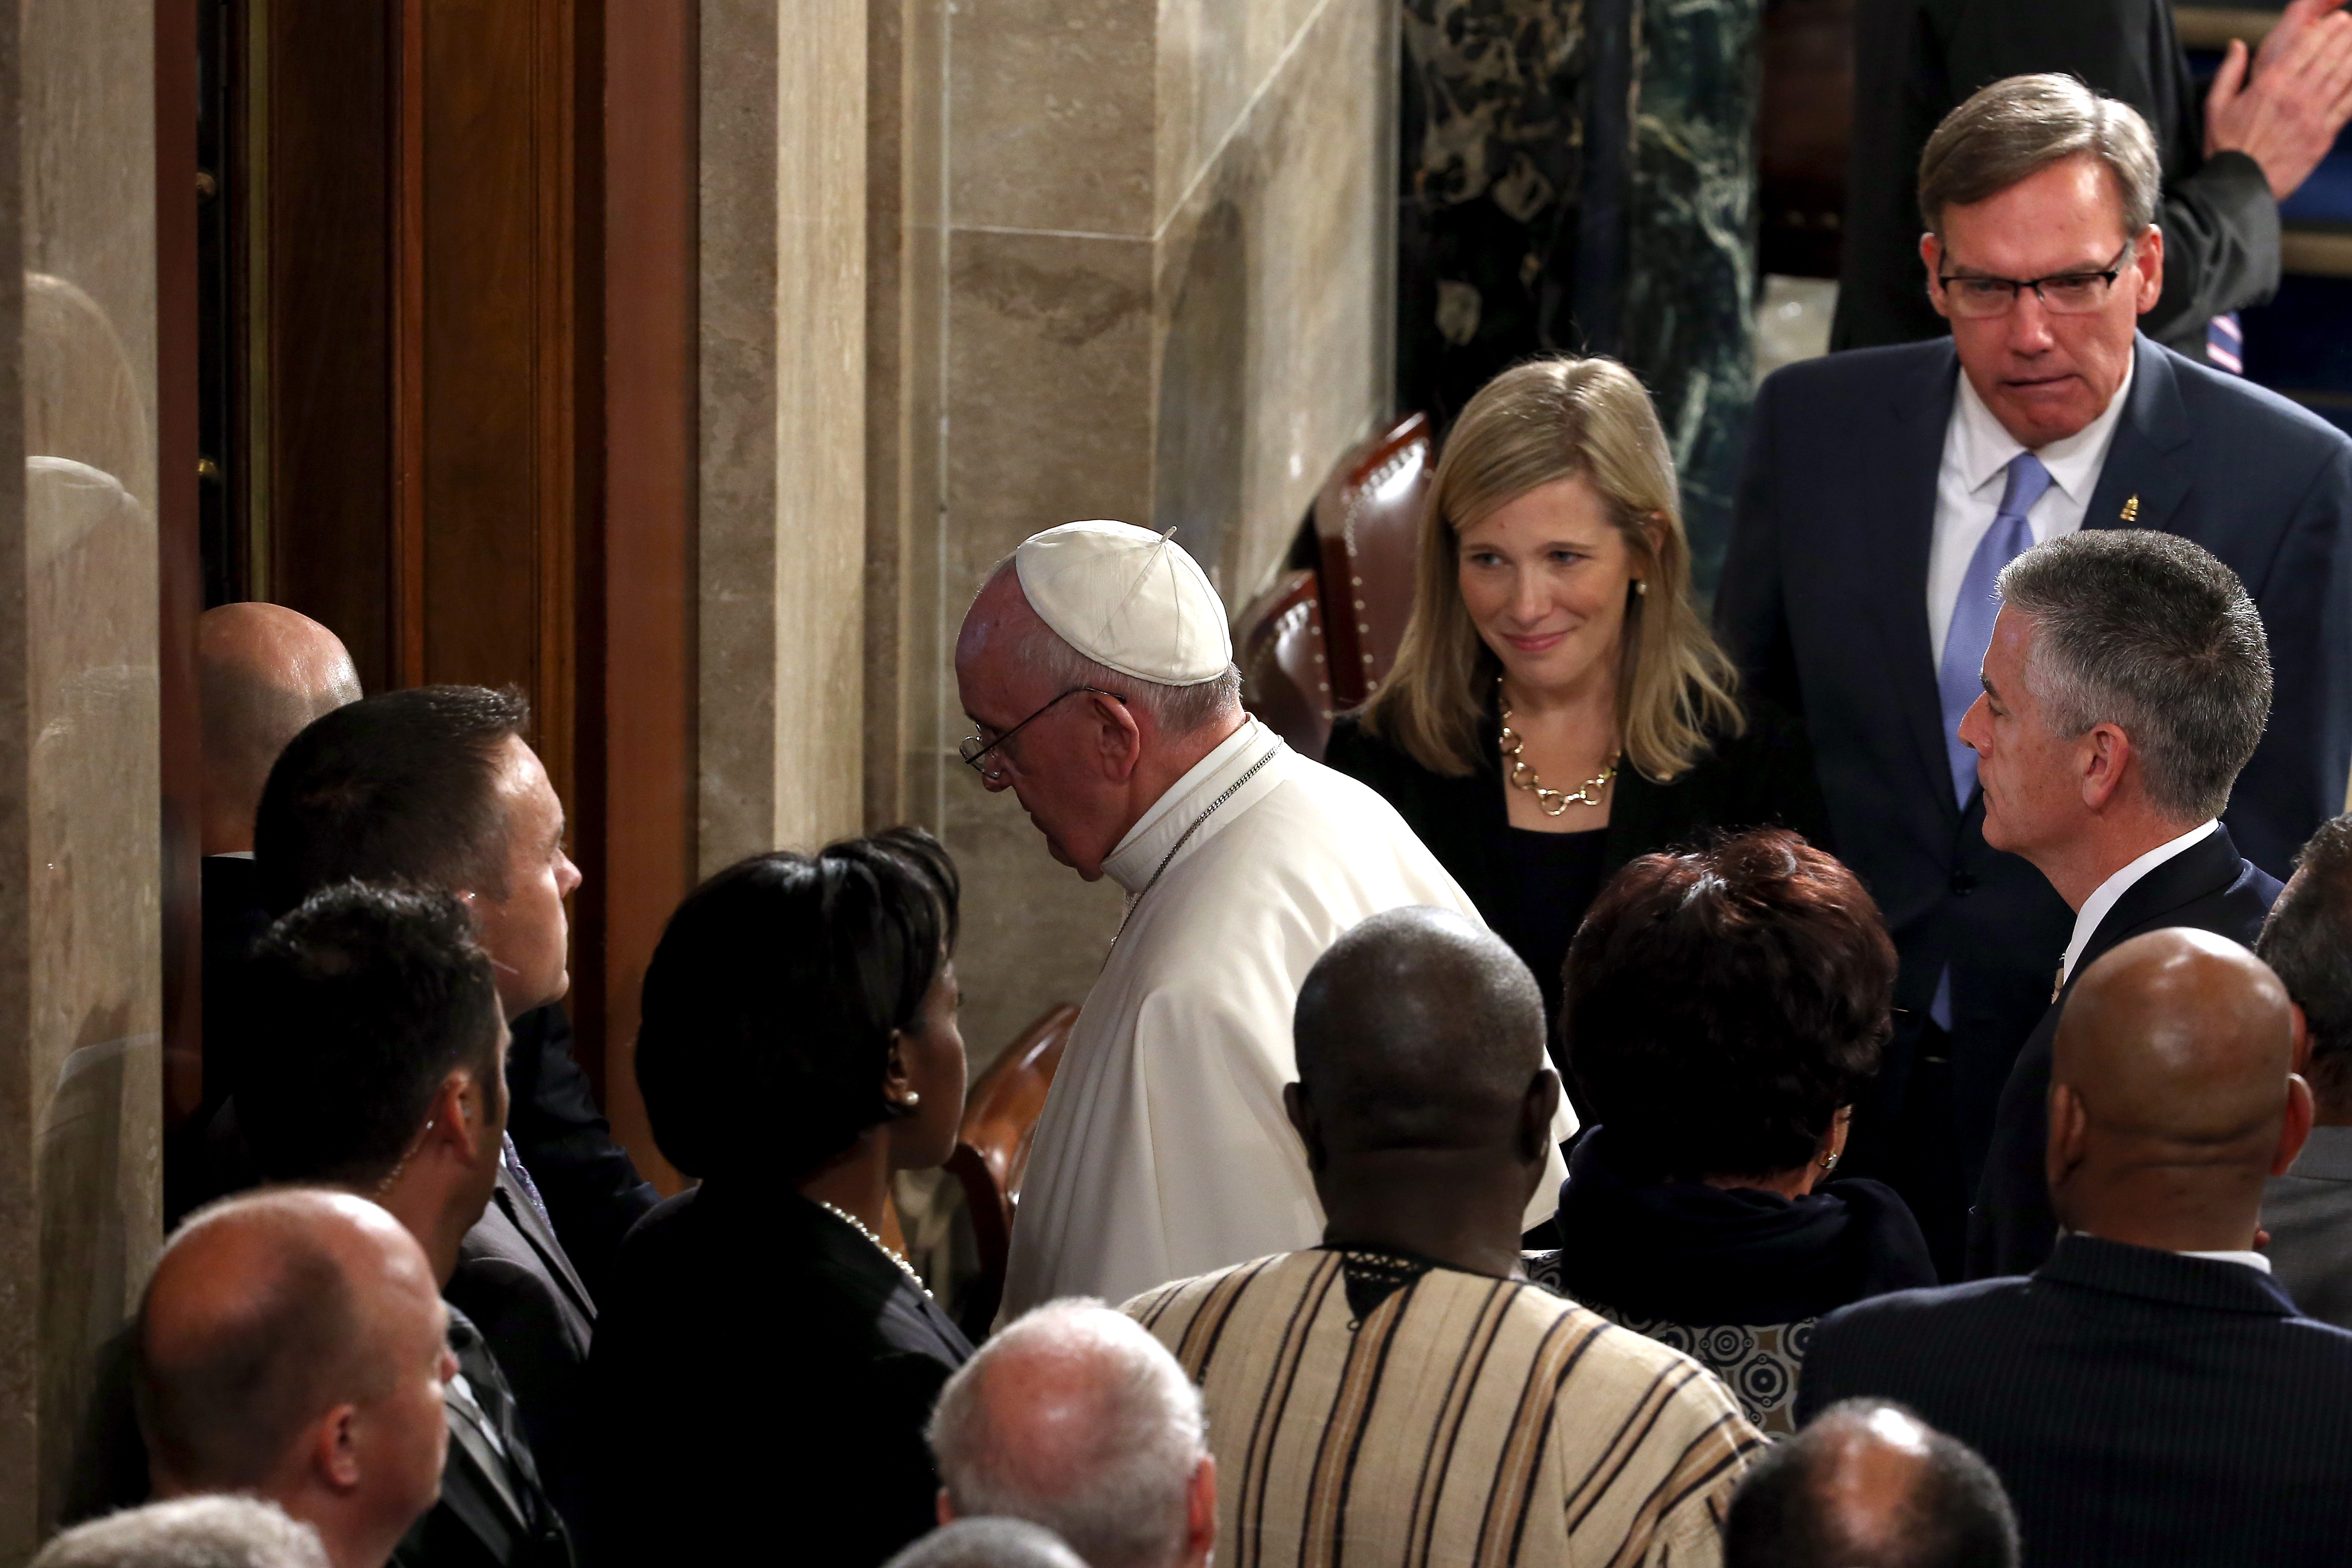 The text of Pope Francis’ speech to Congress